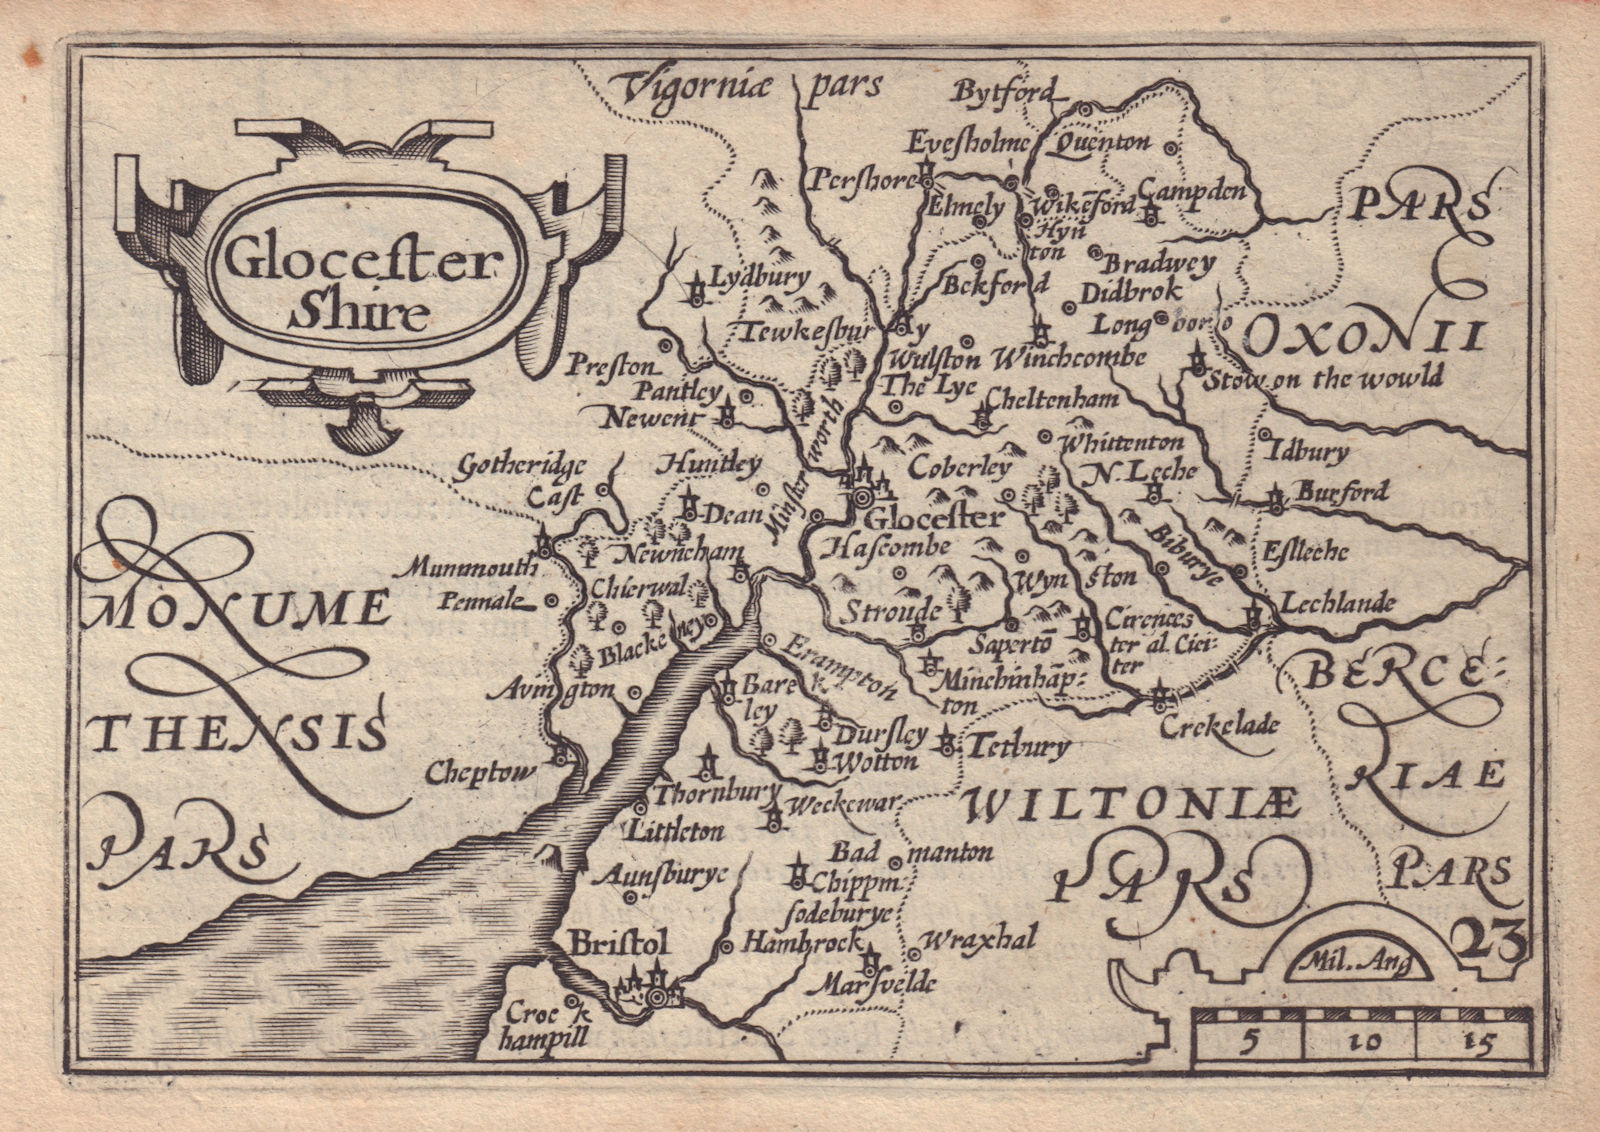 Glocester Shire by Keere. "Speed miniature" Gloucestershire county map 1632